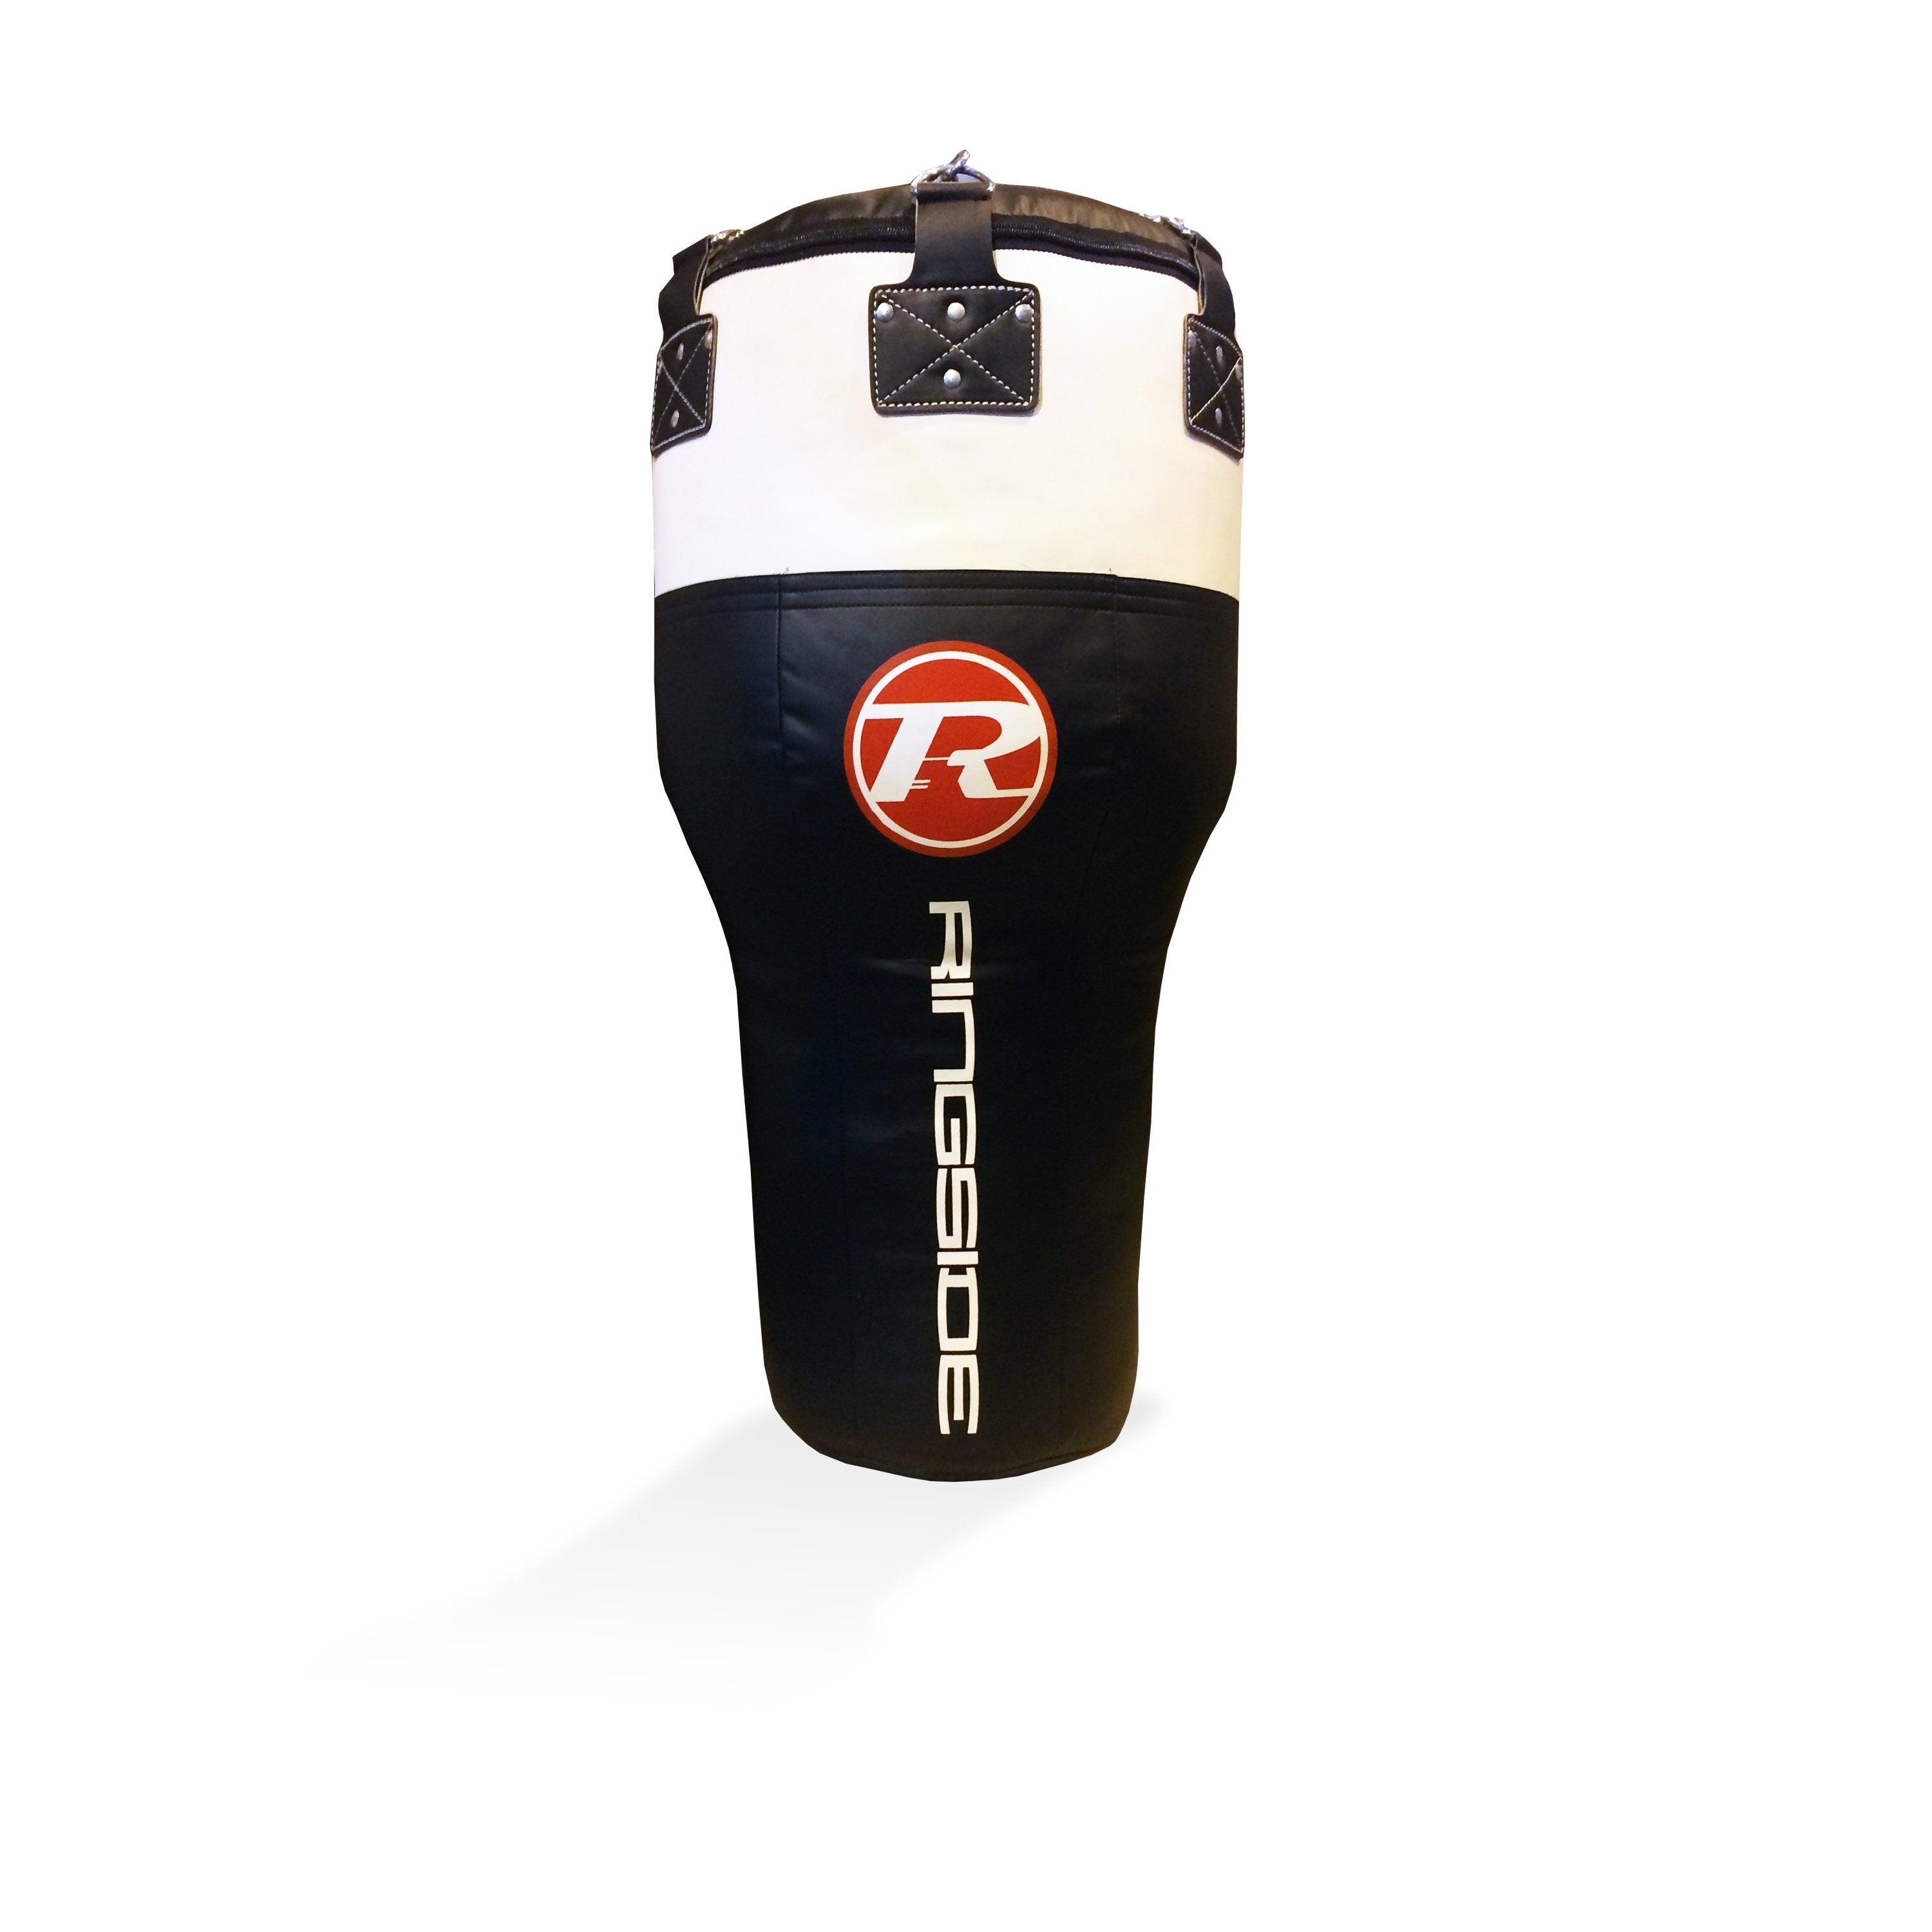 Synthetic Leather Angle Punch Bag - Black / White